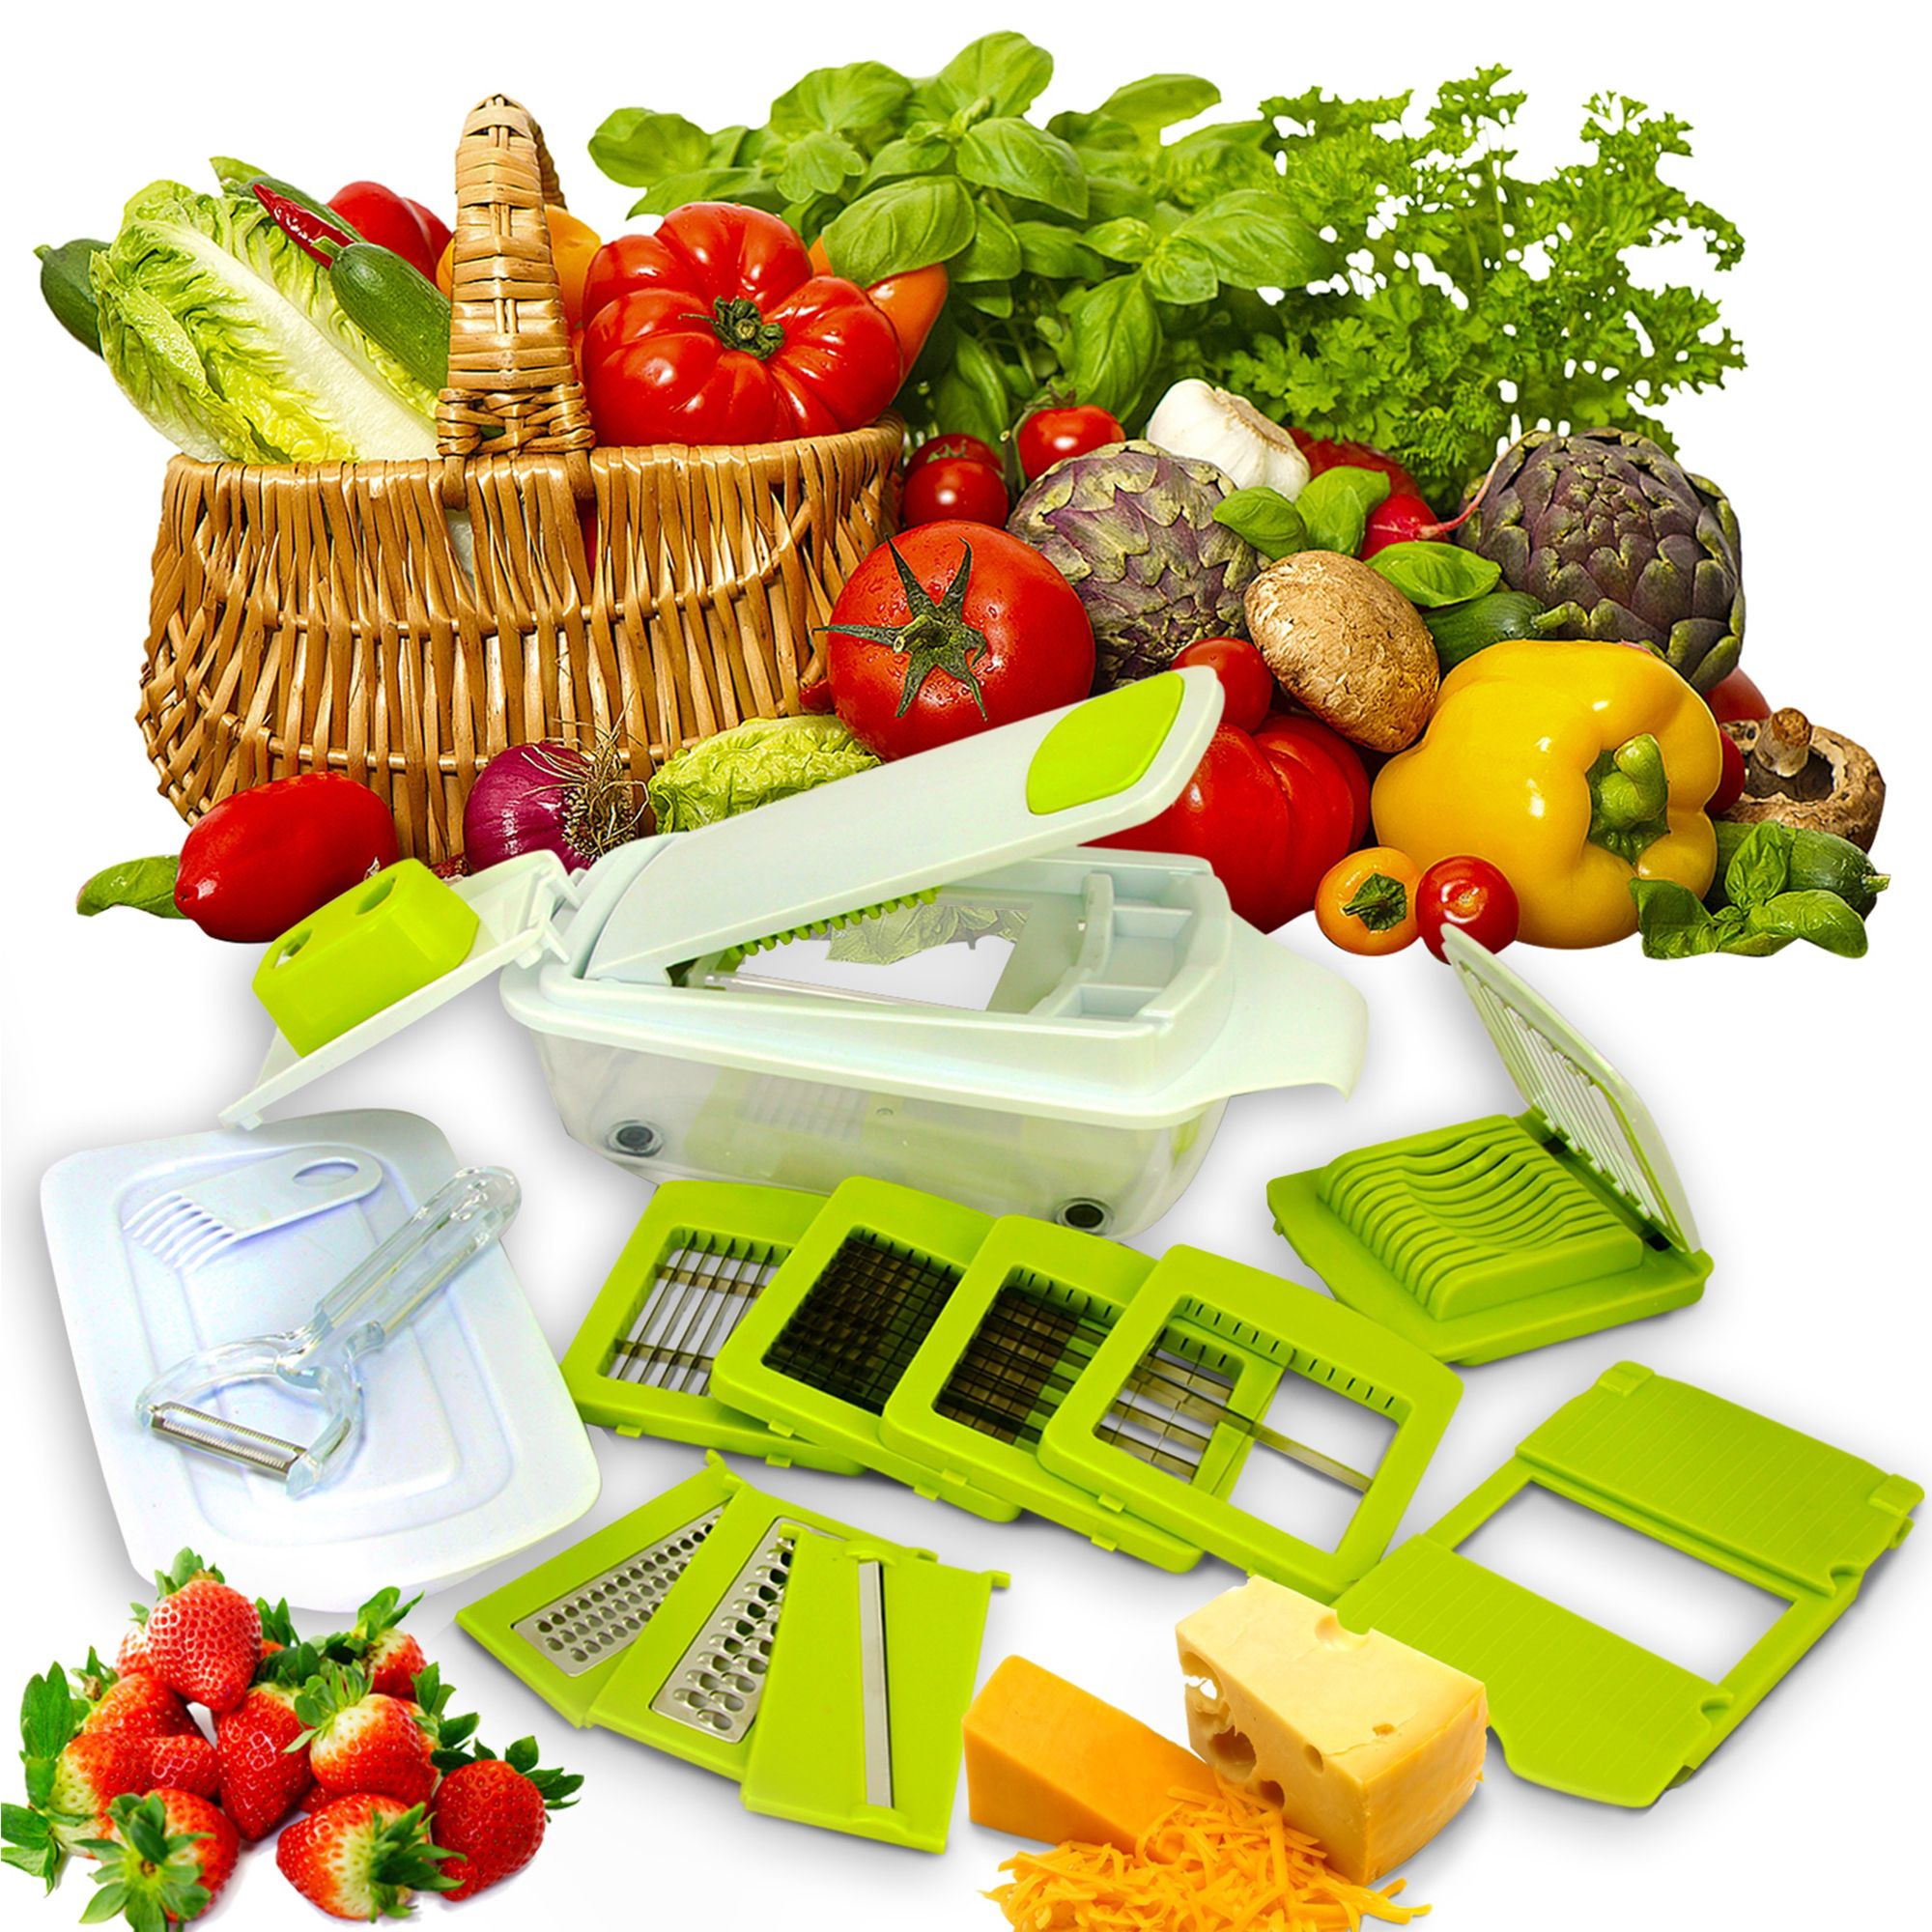 Multi-function Vegetable Cutter 12-piece Set, Kitchen Slicing And